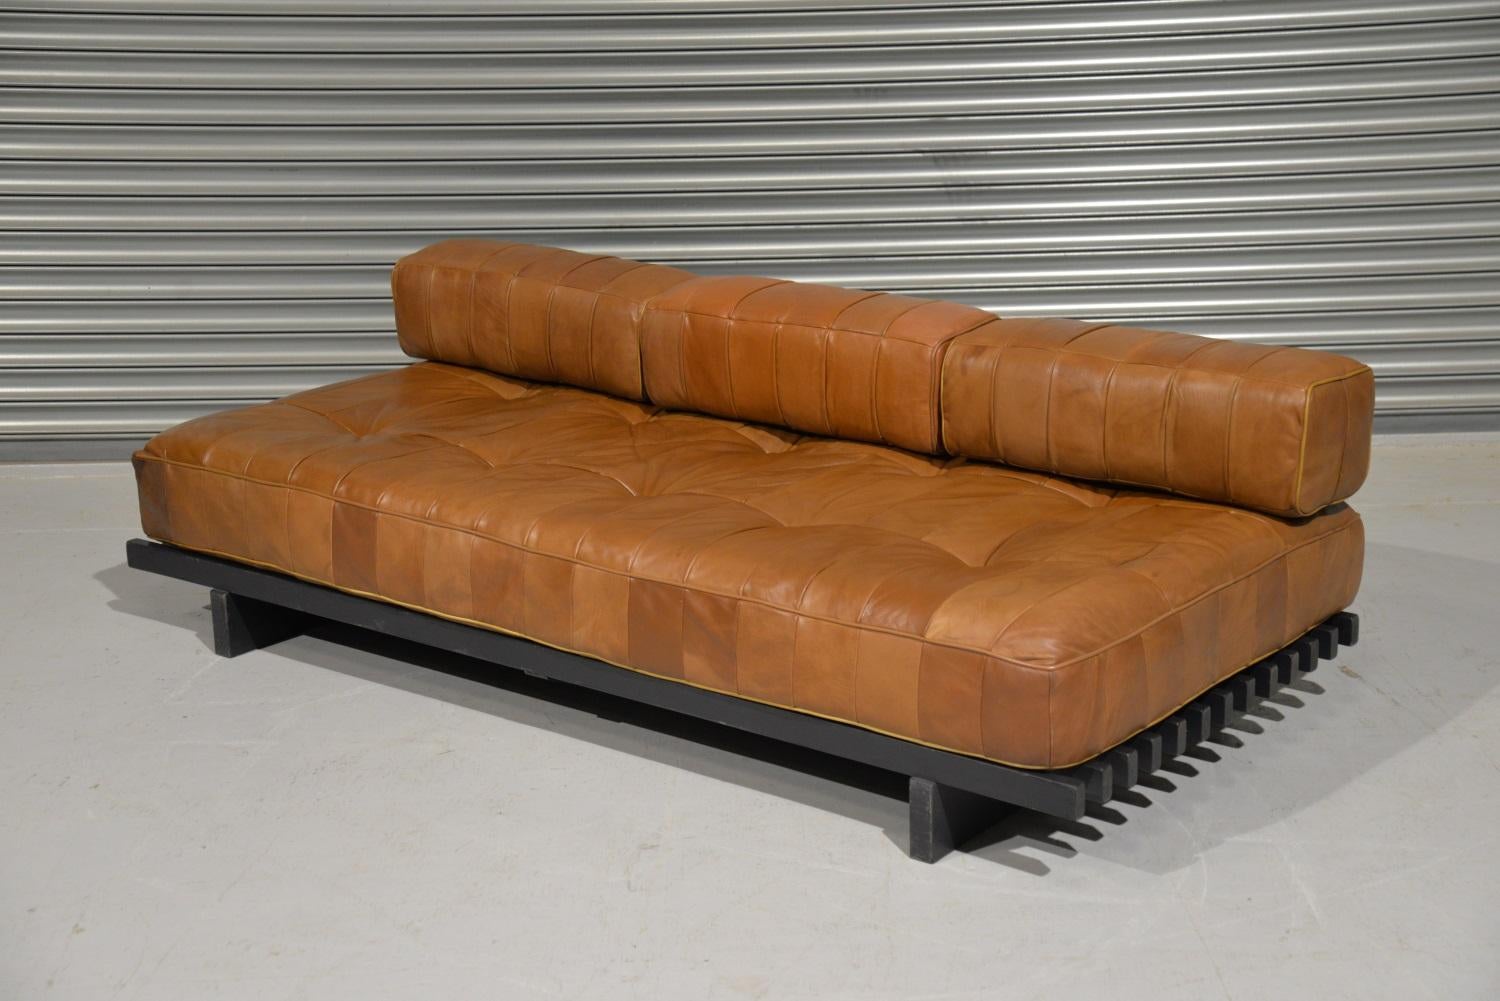 Discounted airfreight for our US and International customers (from 2 weeks door to door).

We are delighted to bring to you a rare and original De Sede DS 80 daybed with set of bolster patchwork back cushions. Built in the 1960s to incredibly high